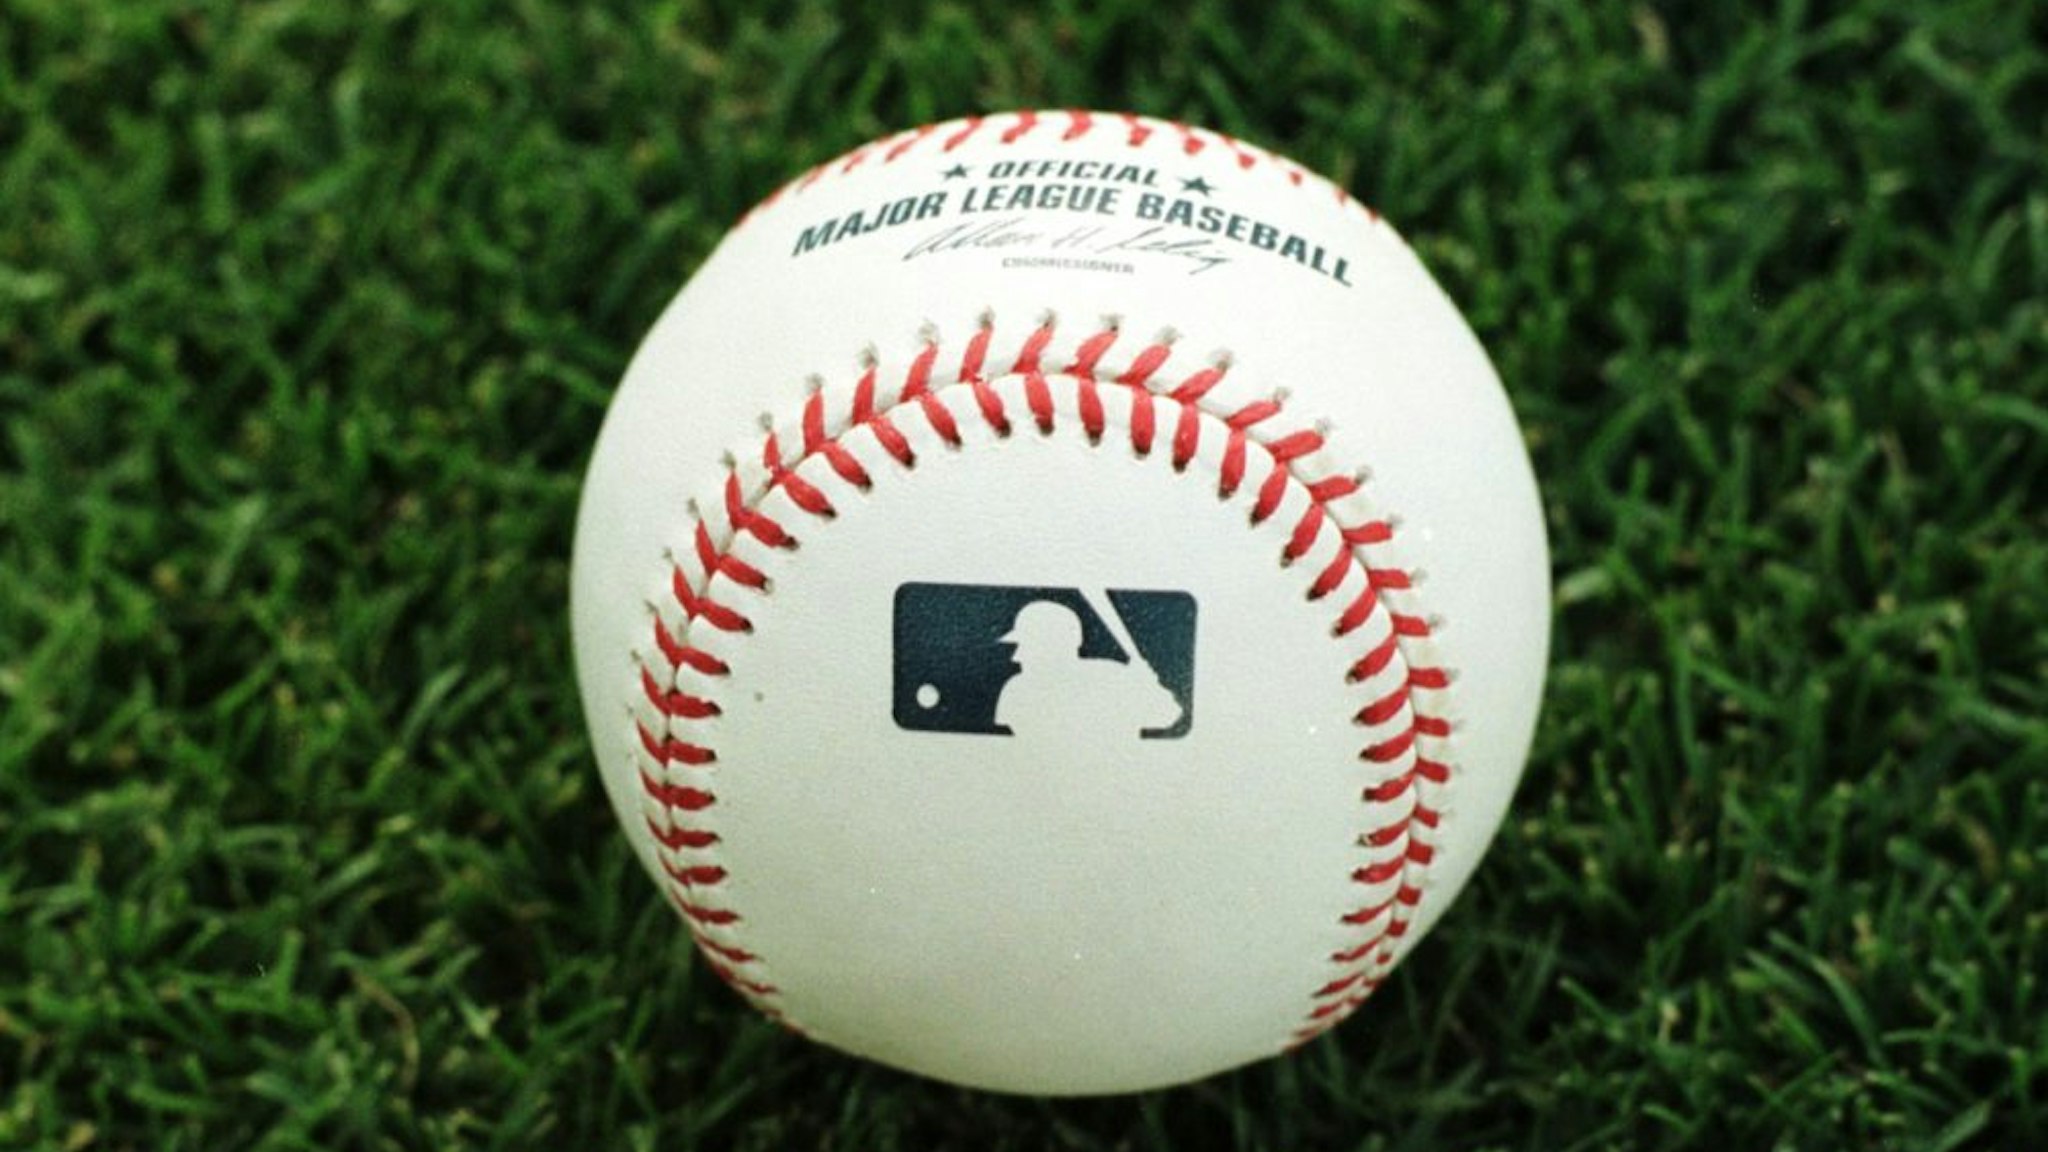 ANAHEIM - APRIL 24: A close-up picture shows one of the new Major League Baseball official game balls lying on the grass during the Detroits Tigers game against the Anaheim Angels on April 24, 2000 at Edison Field in Anaheim, California.